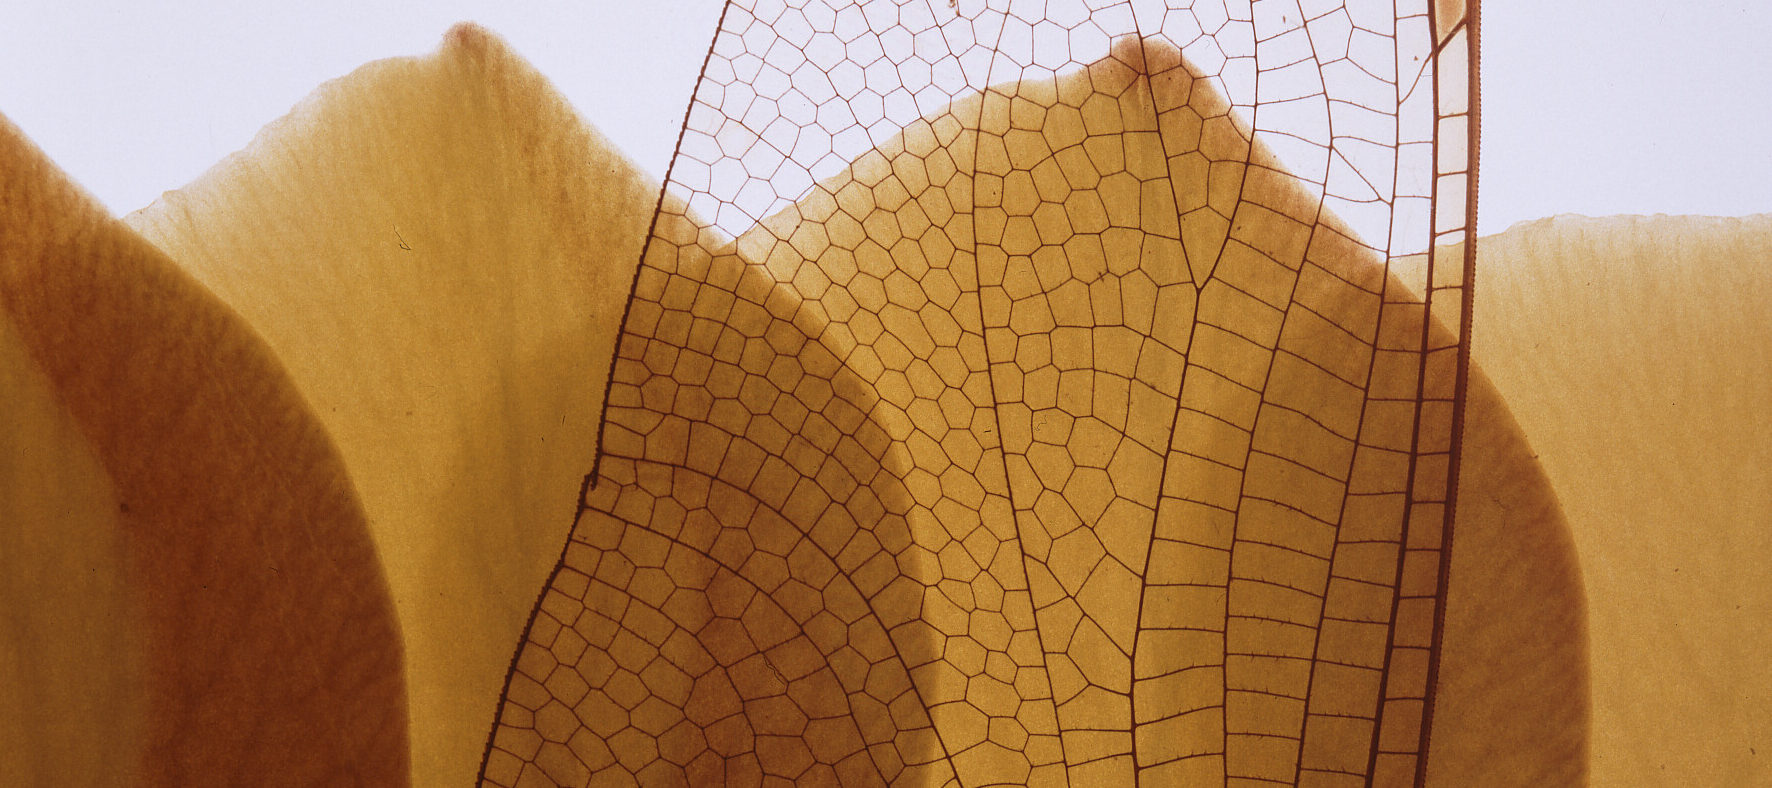 A zoomed-in view of an insect's wing shows the darker lines that create a pattern against the translucent wing. In the background, flower petals fill the bottom half of the image and a white background fills the top.